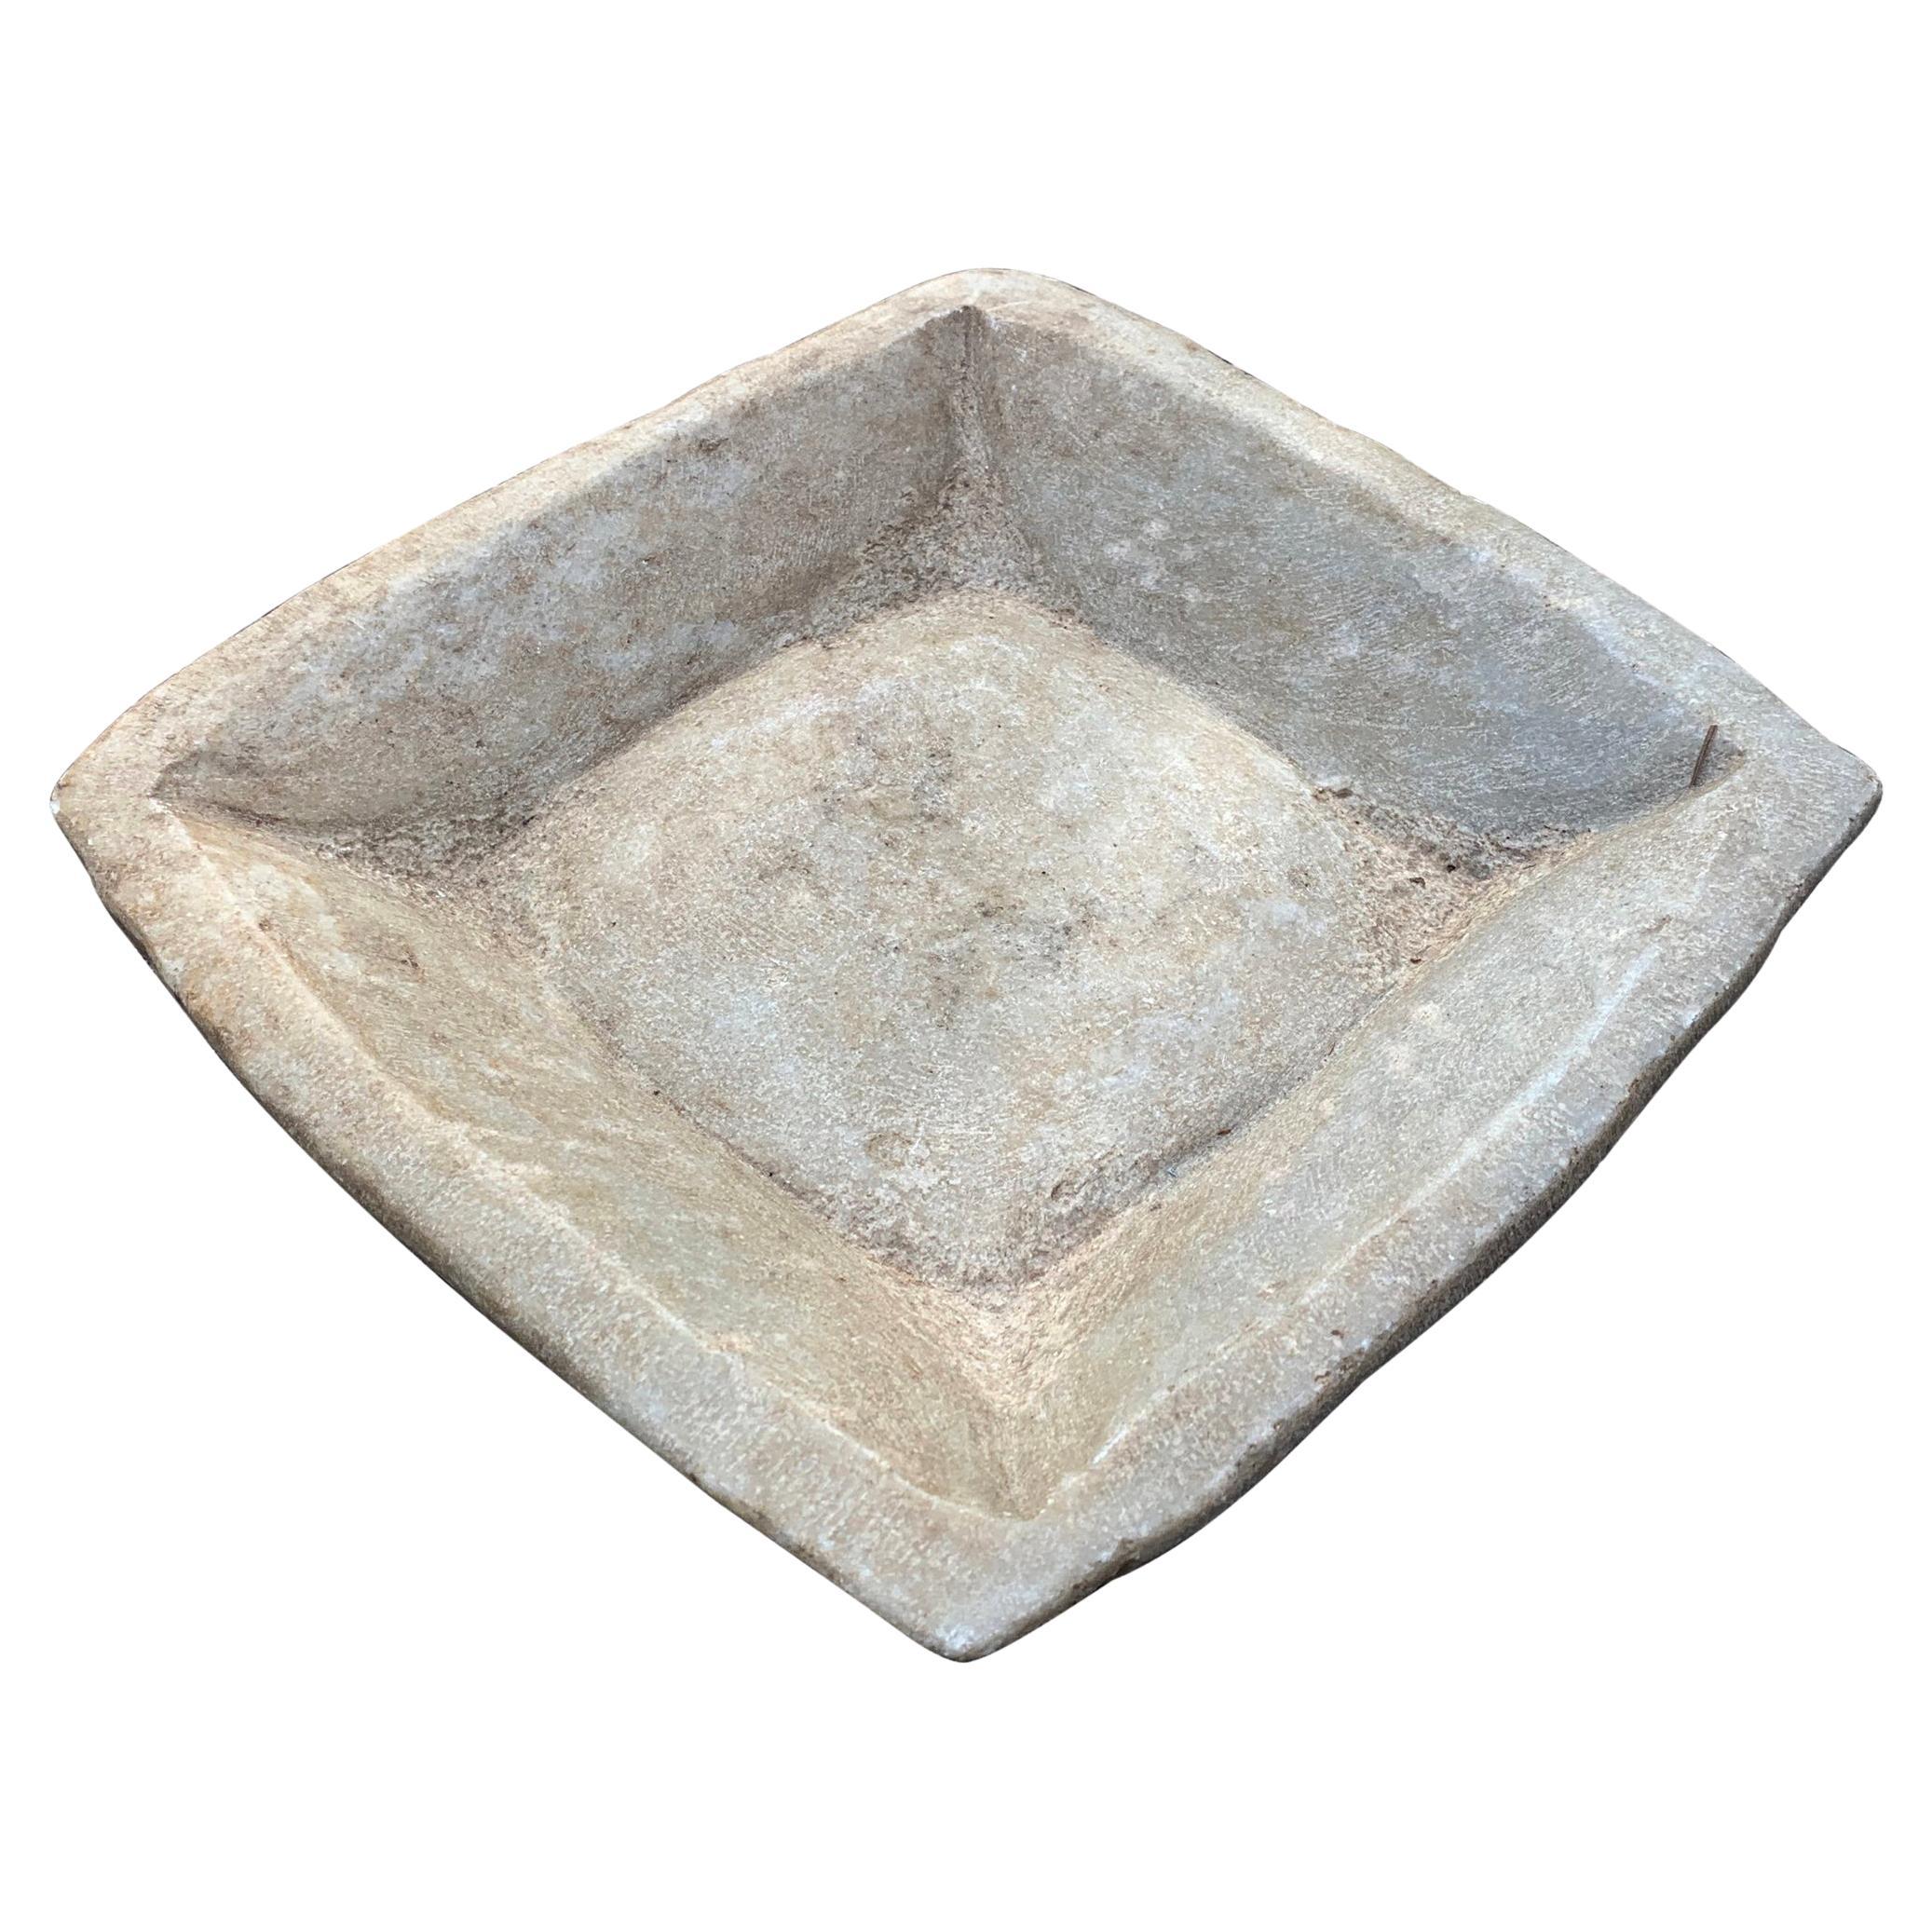 Rustic Hand-Carved Marble Square Dish